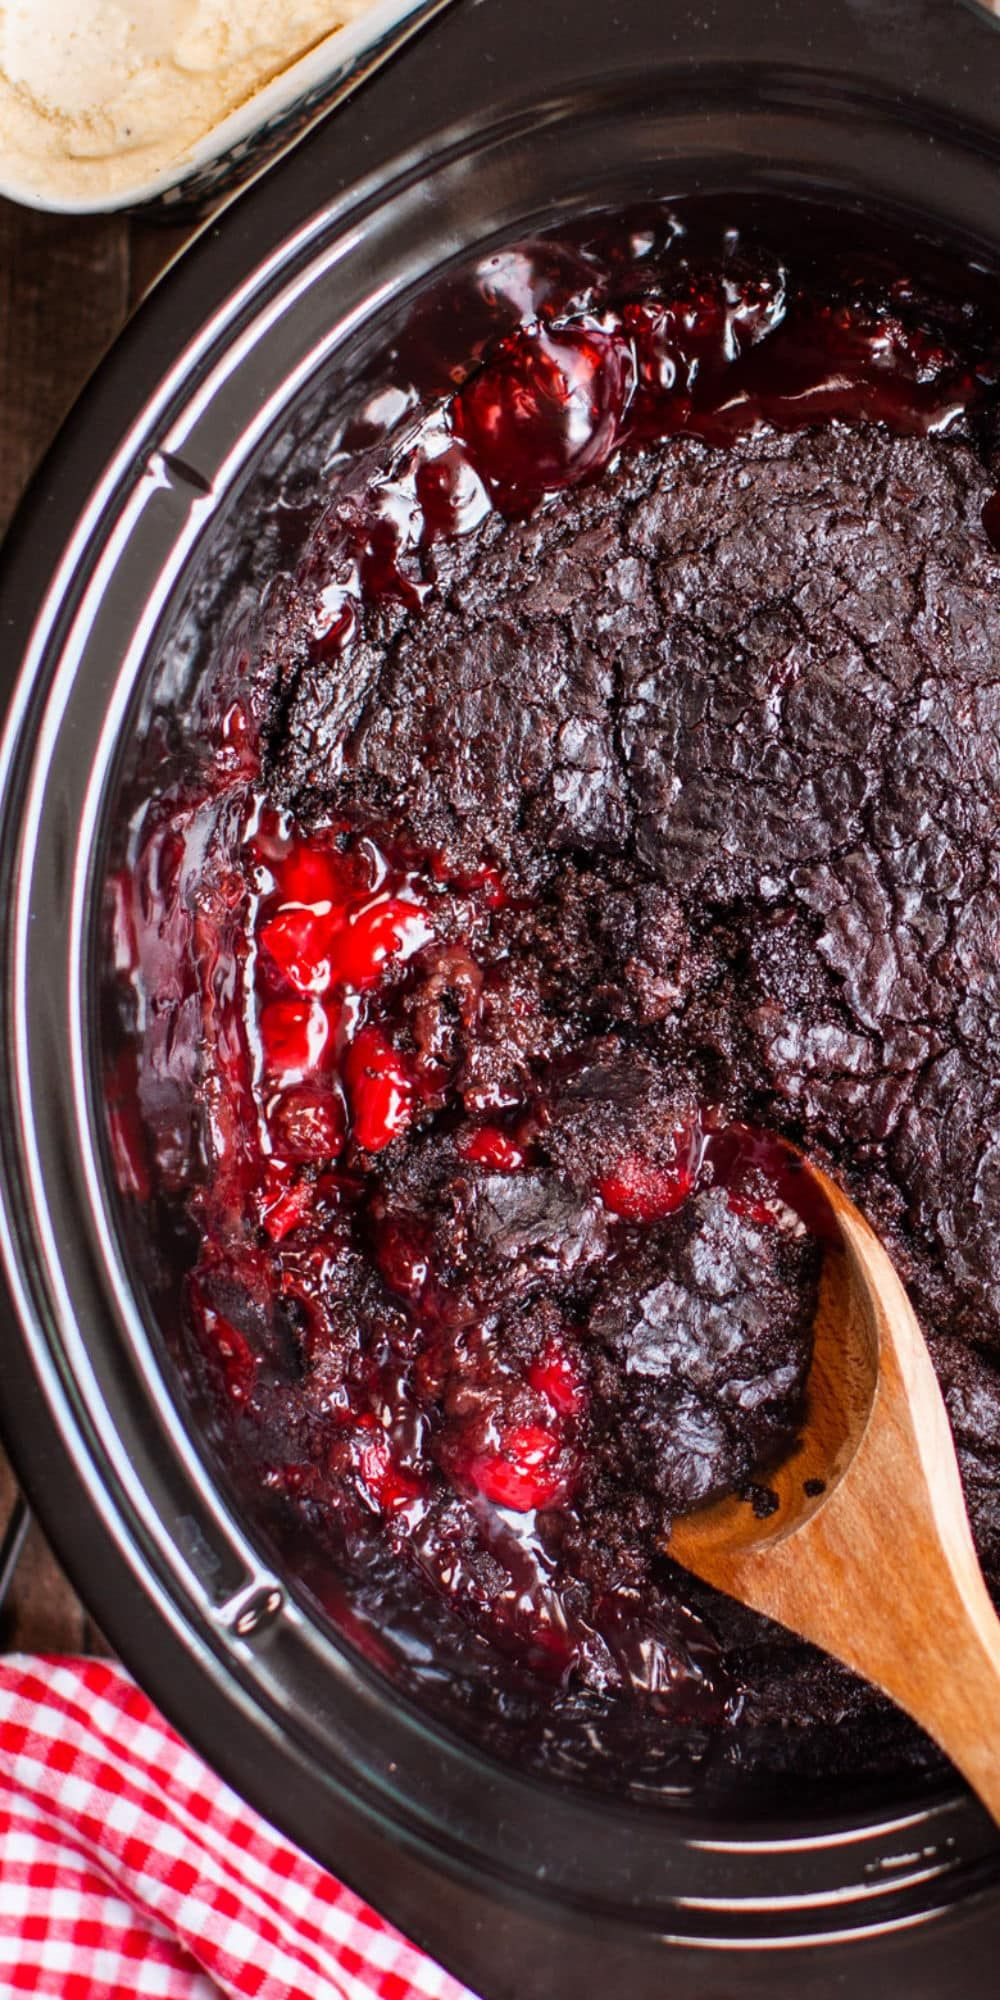 Slow Cooker Cake Recipes With Yellow Cake Mix
 Slow Cooker Chocolate Cherry Dump Cake